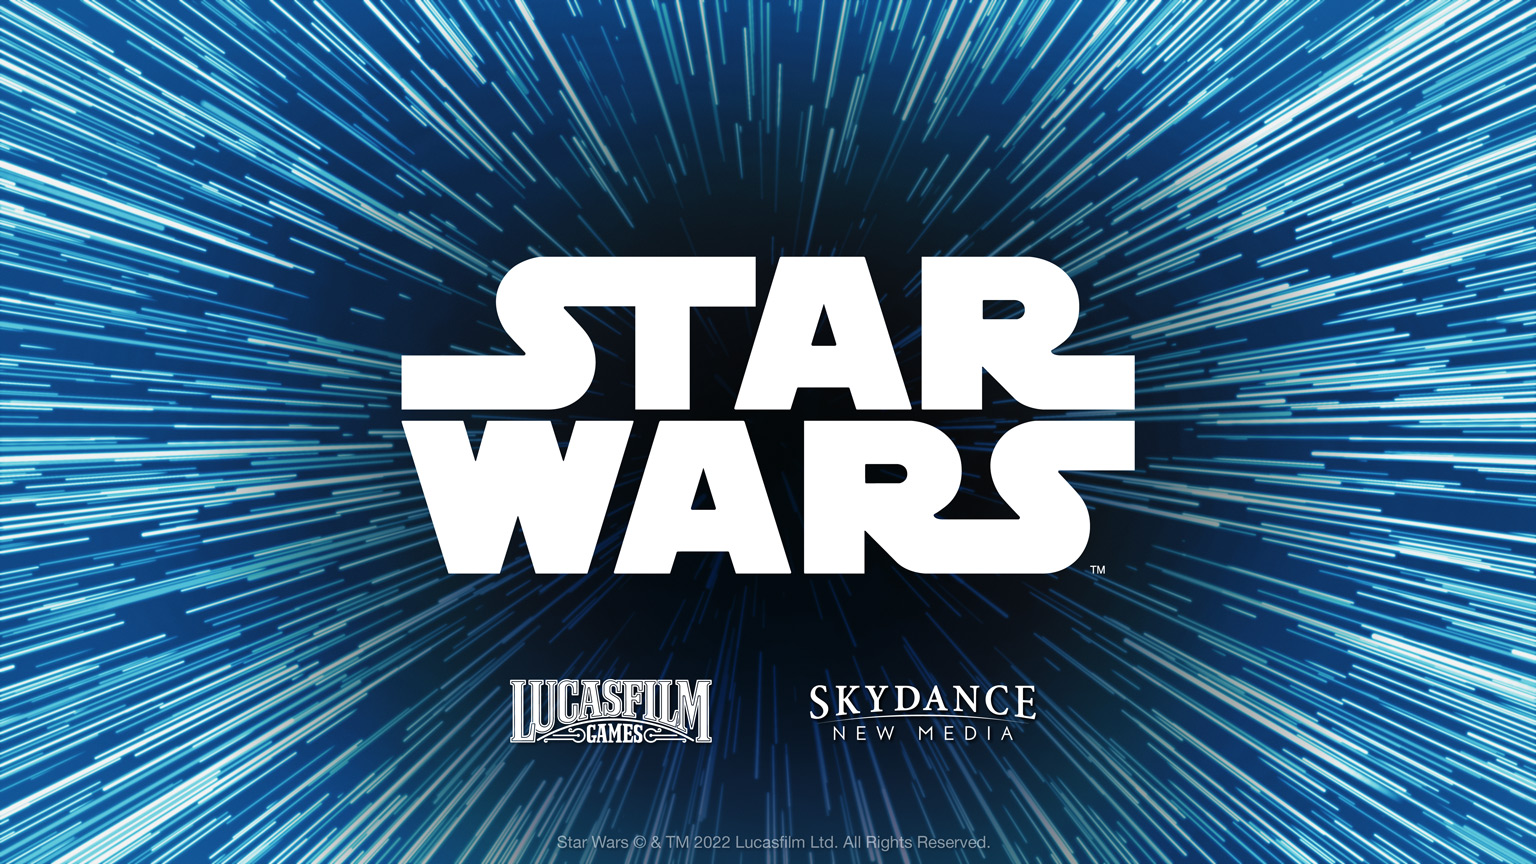 Star Wars Logo with Lucasfilm and Skydance